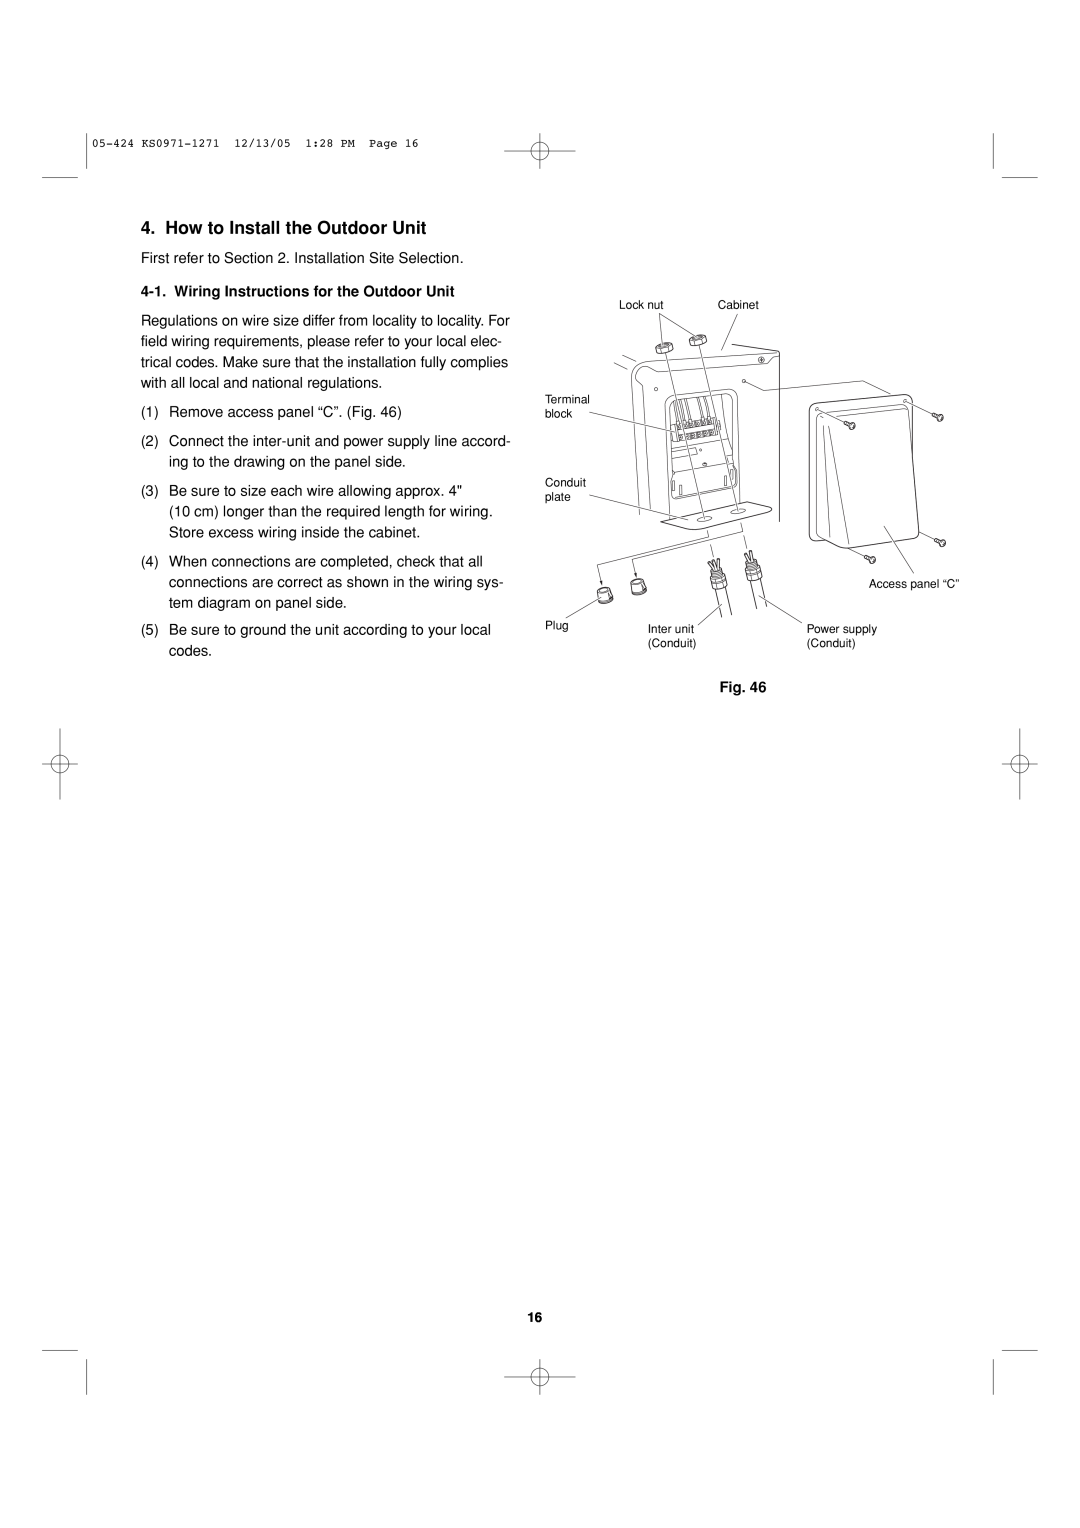 Sanyo Cool/Dry installation instructions How to Install the Outdoor Unit, Wiring Instructions for the Outdoor Unit 